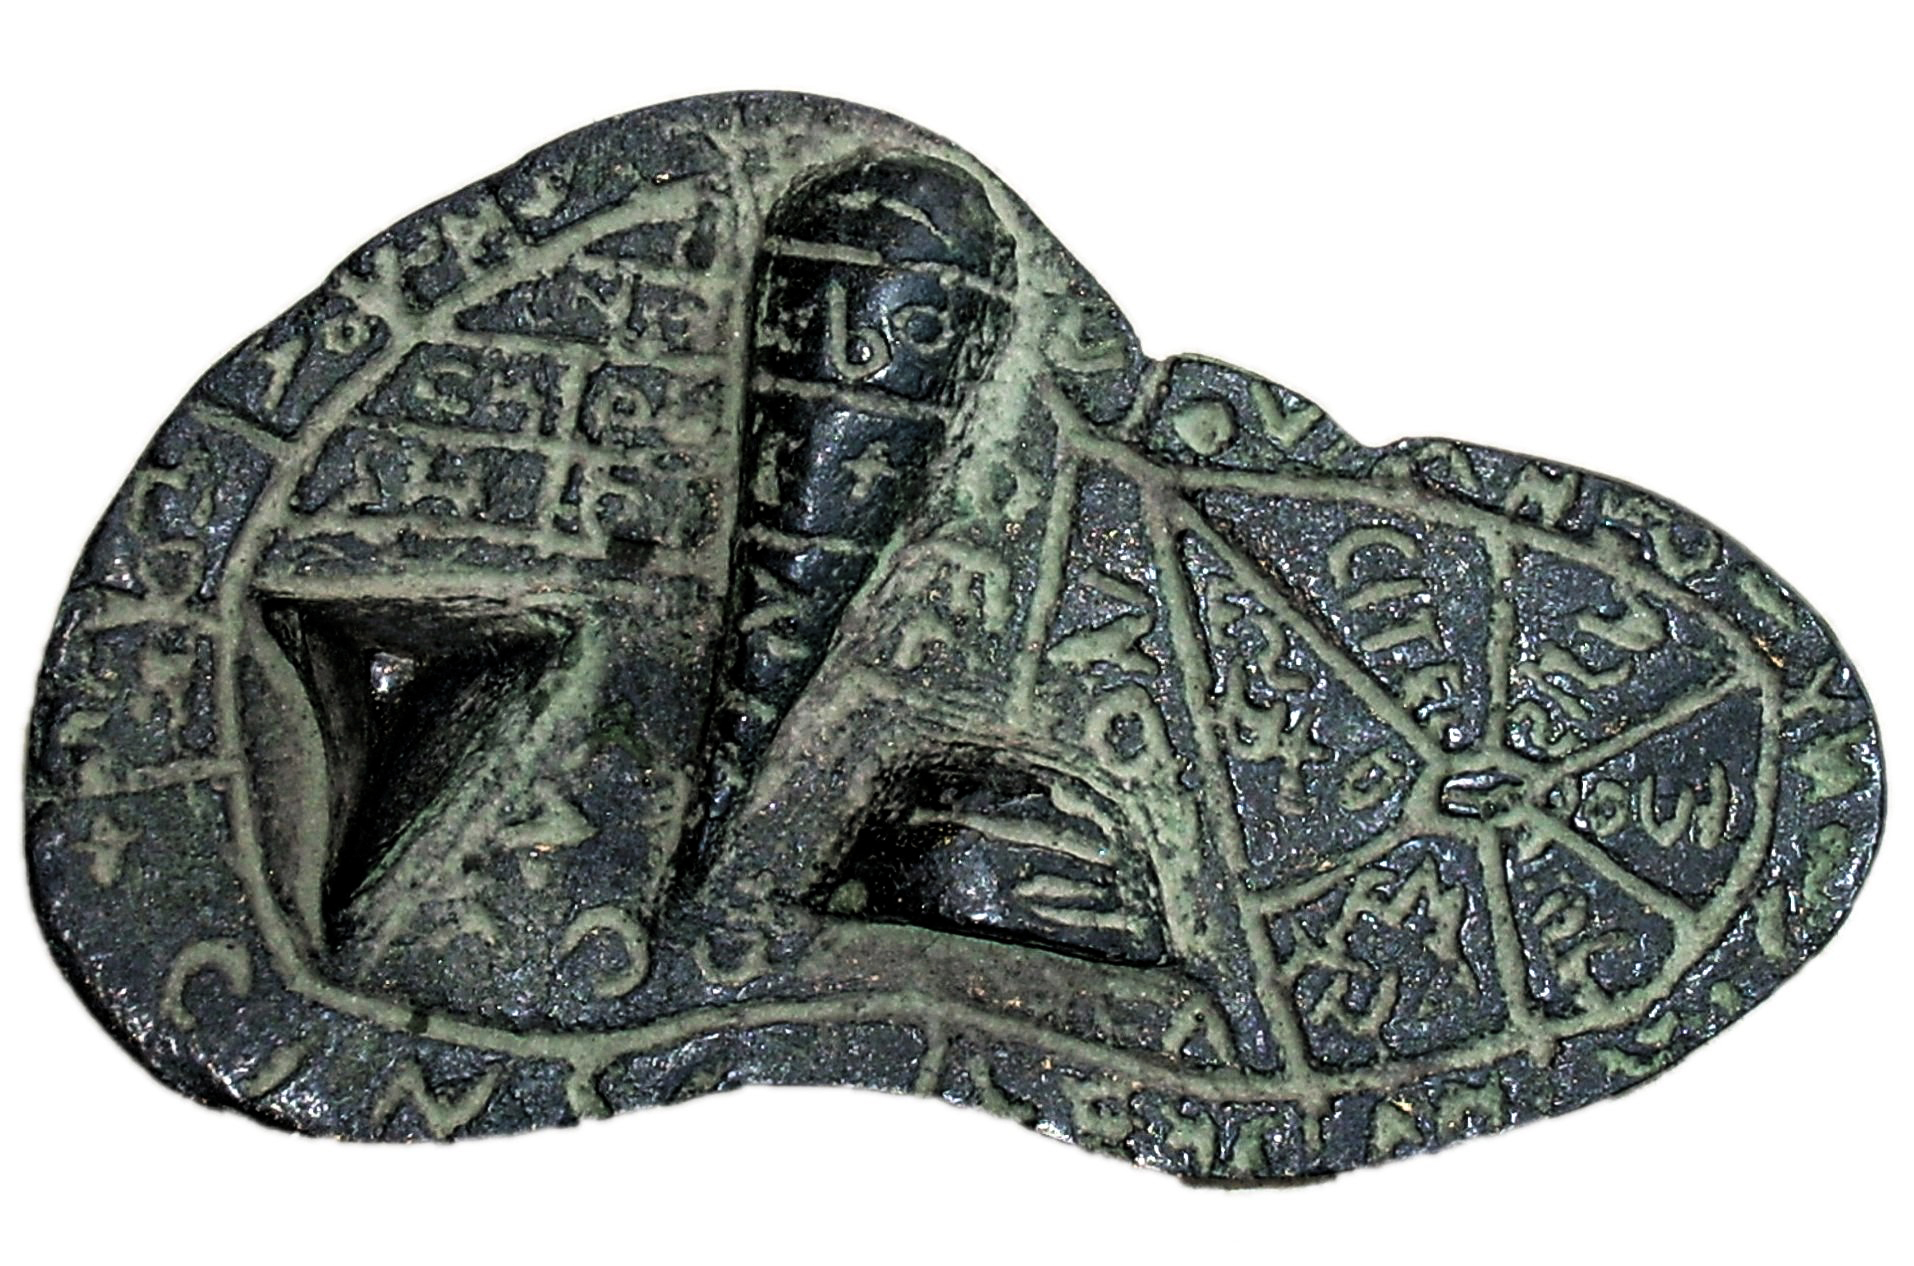 Liver-of-Piacenza-Etruscan-astronomical-and-divination-artifact-replica